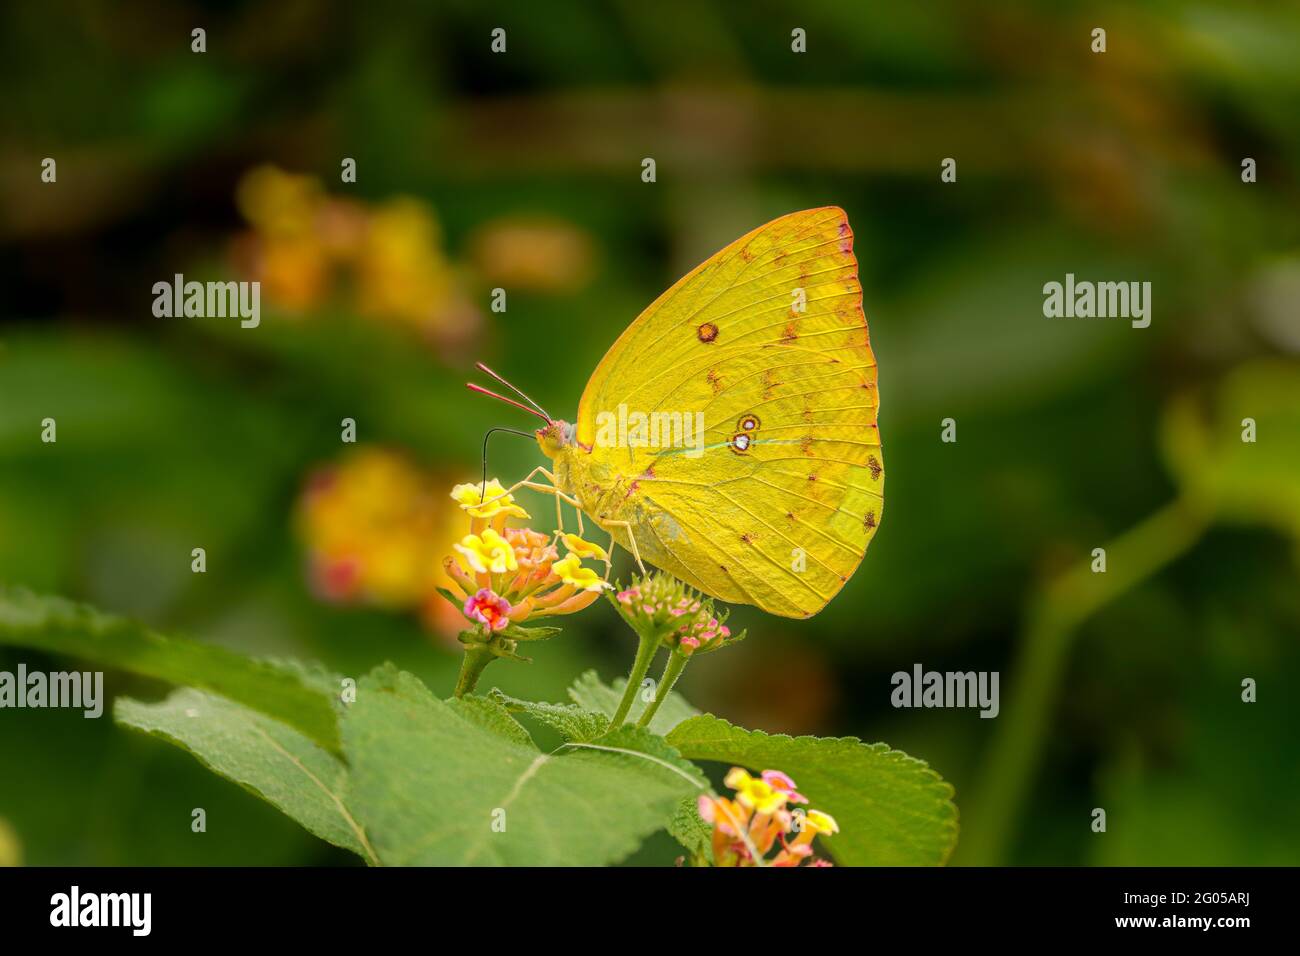 Yellow butterfly on flower Stock Photo